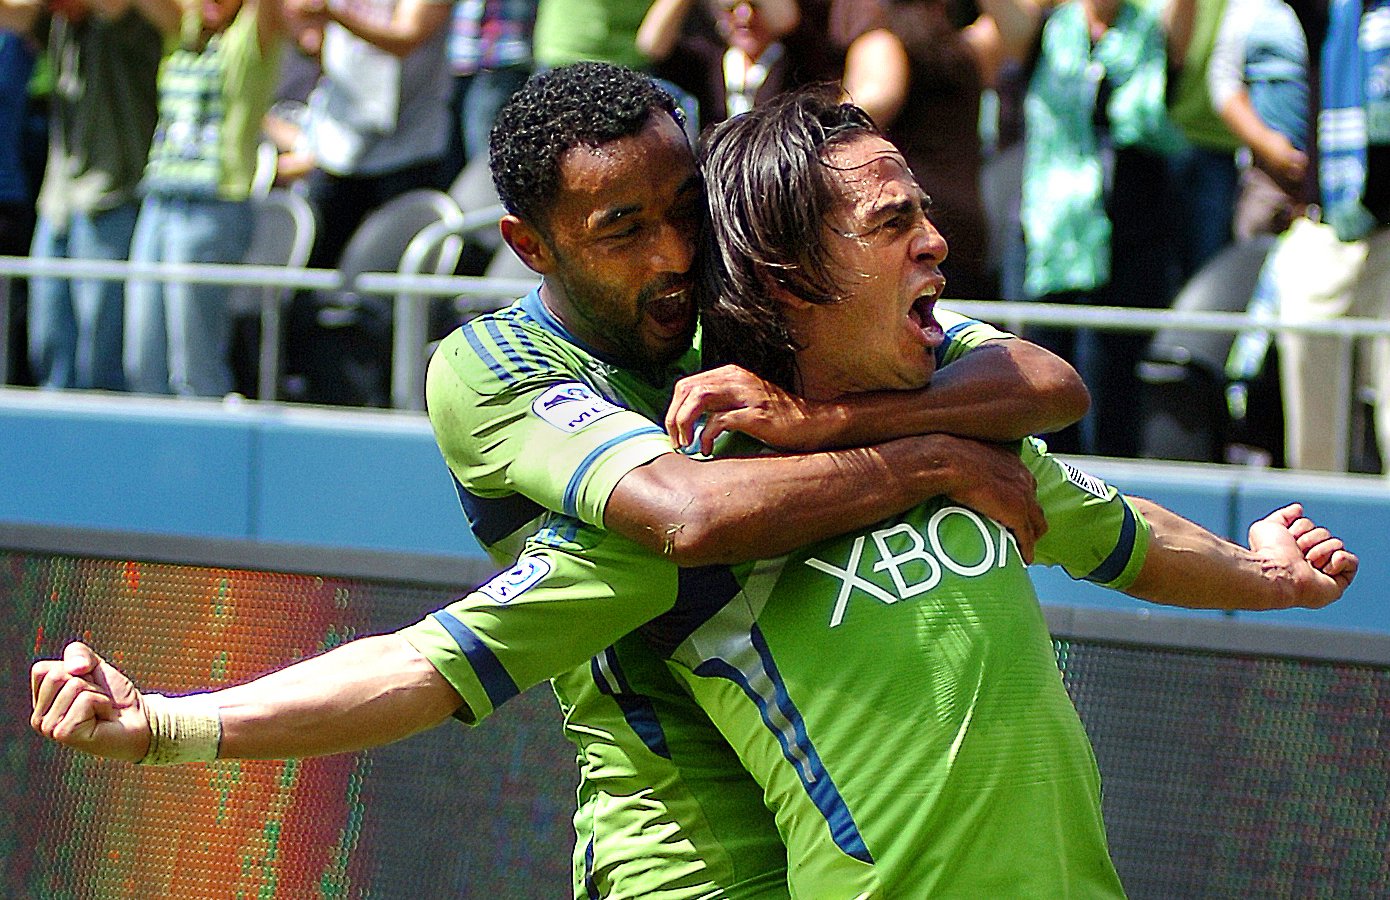  Seattle Sounder Mauro Rosales, right, gets a congratulatory hug from defender James Riley after scoring a goal off of a feed from Fredy Montero against the Colorado Rapids at CenturyLink Field in Seattle, Saturday, July 16, 2011. Rosales' goal prove